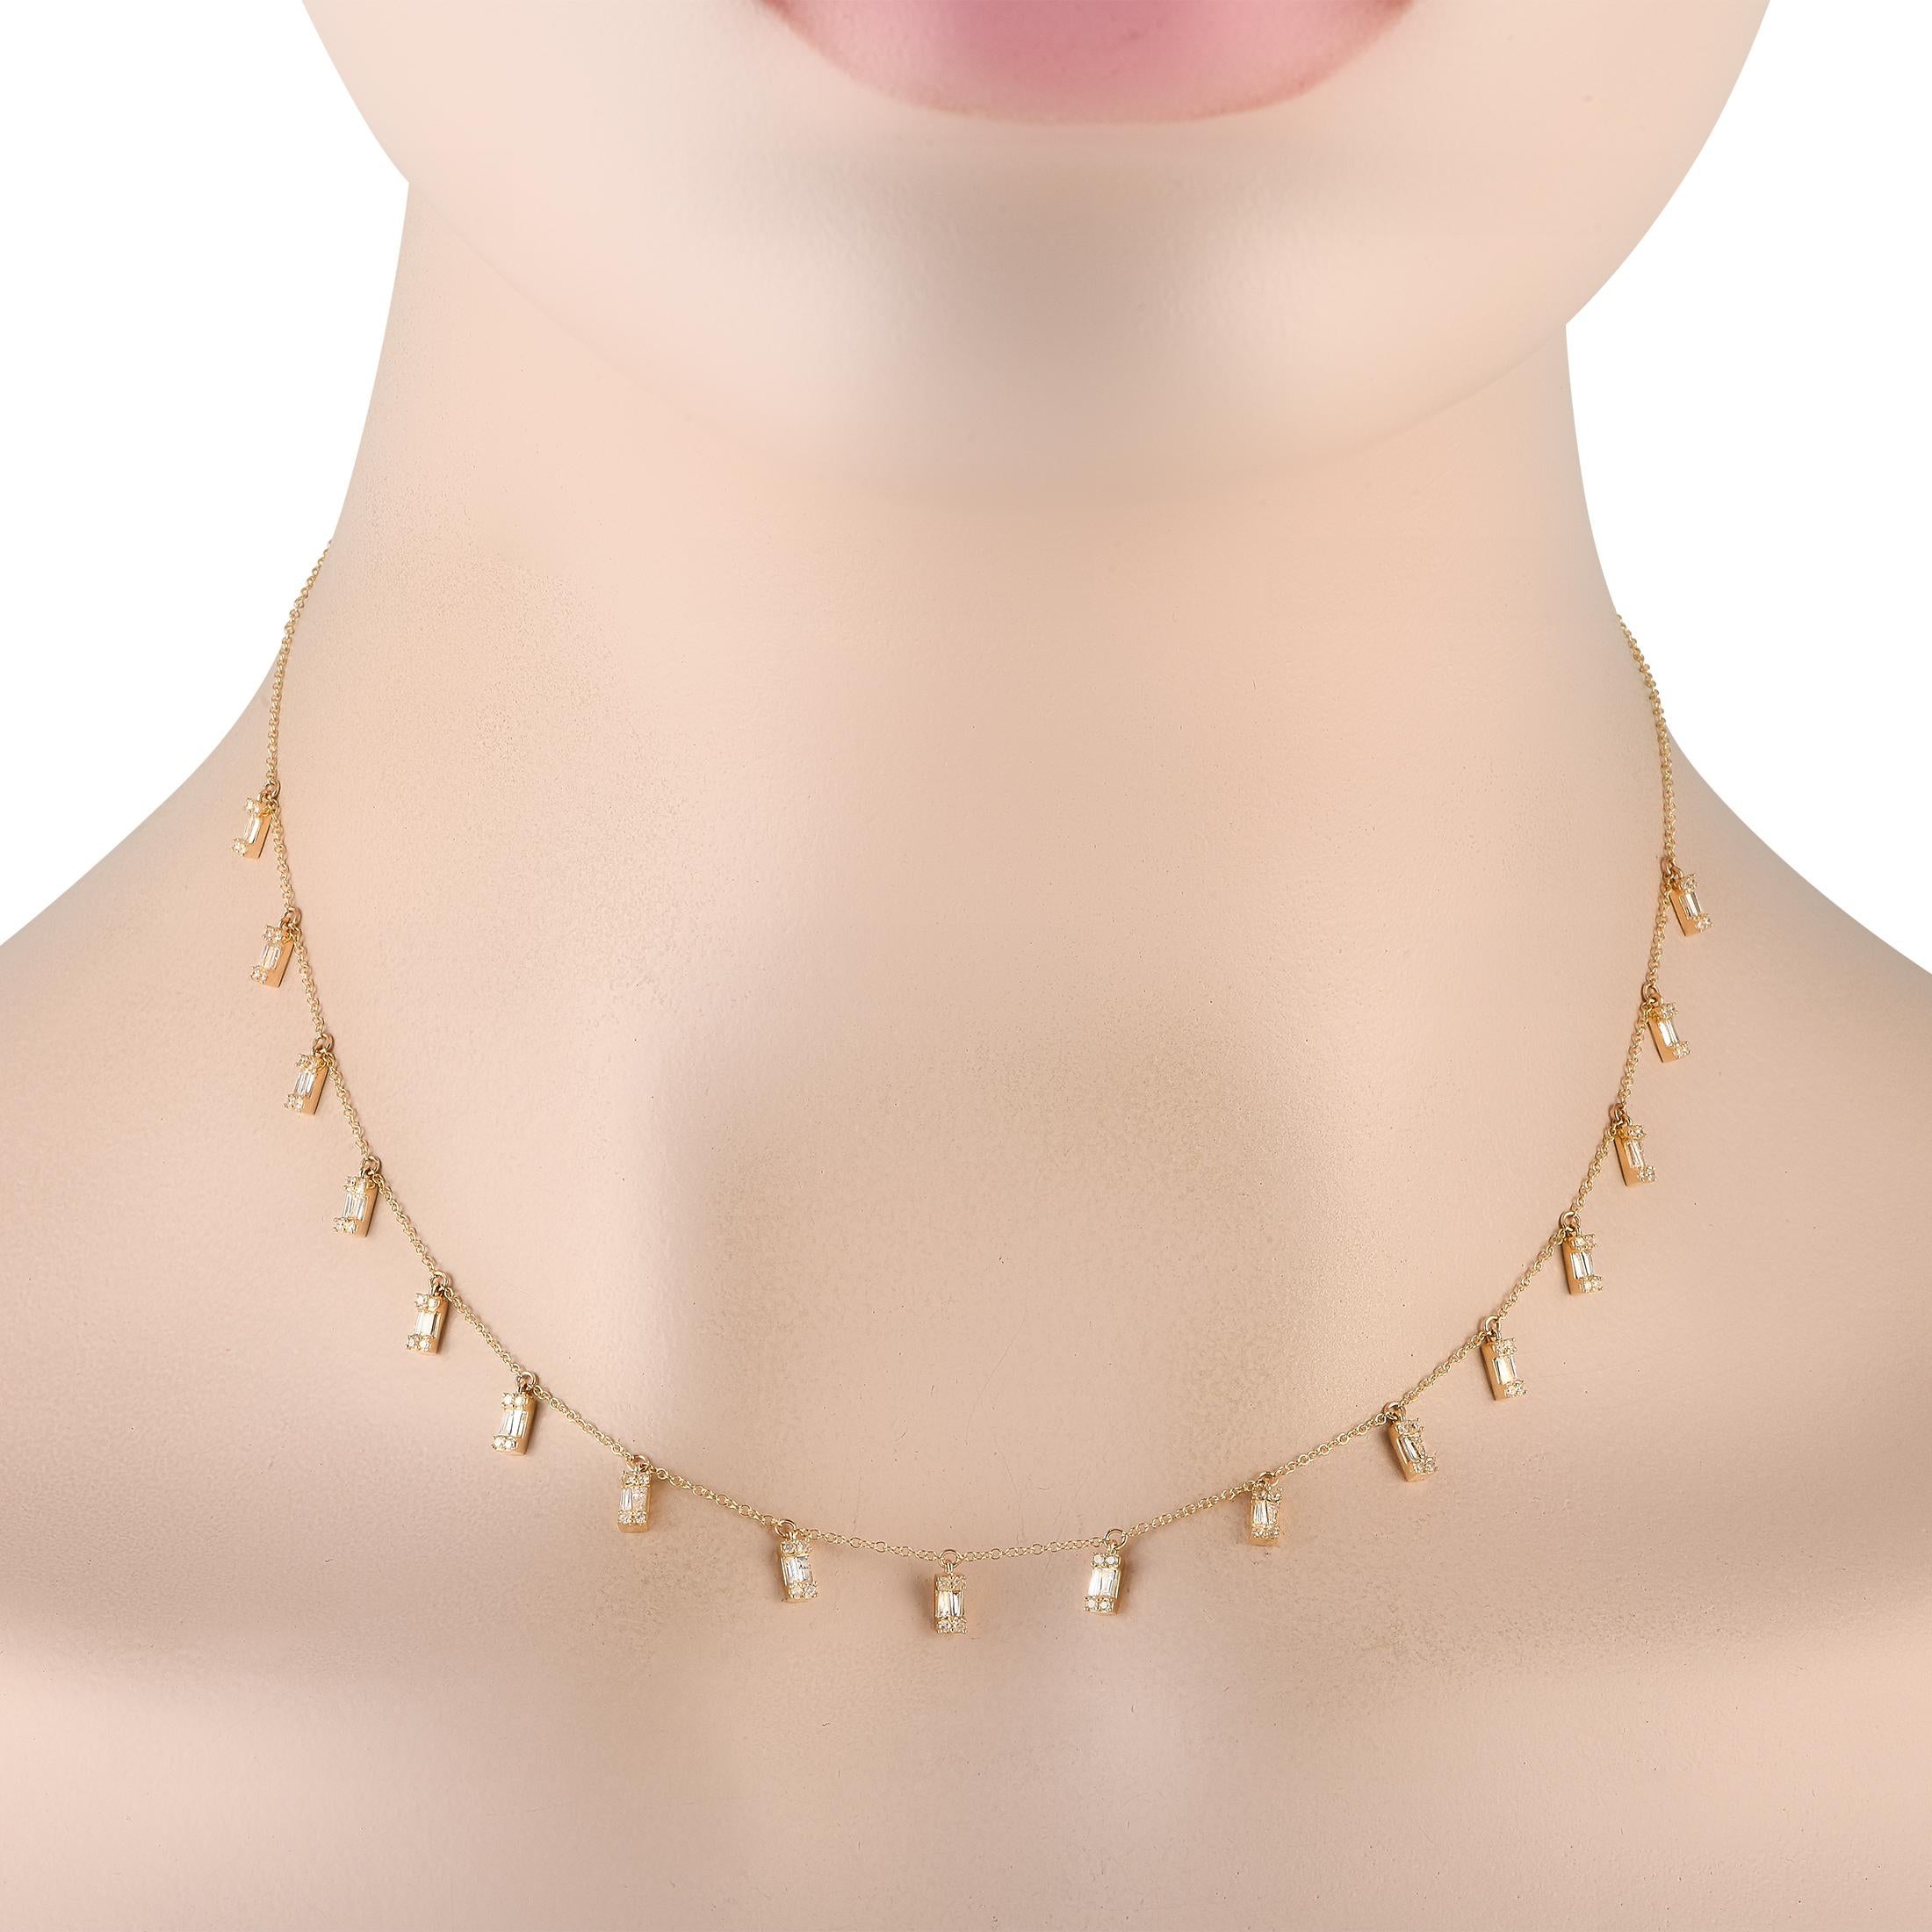 A series of dangling Diamond accents with a total weight of 0.98 carats give this necklace a chic, sophisticated sense of style. Perfectly on-trend, this delicate design is crafted from opulent 14K Yellow Gold features a 16 chain.This jewelry piece